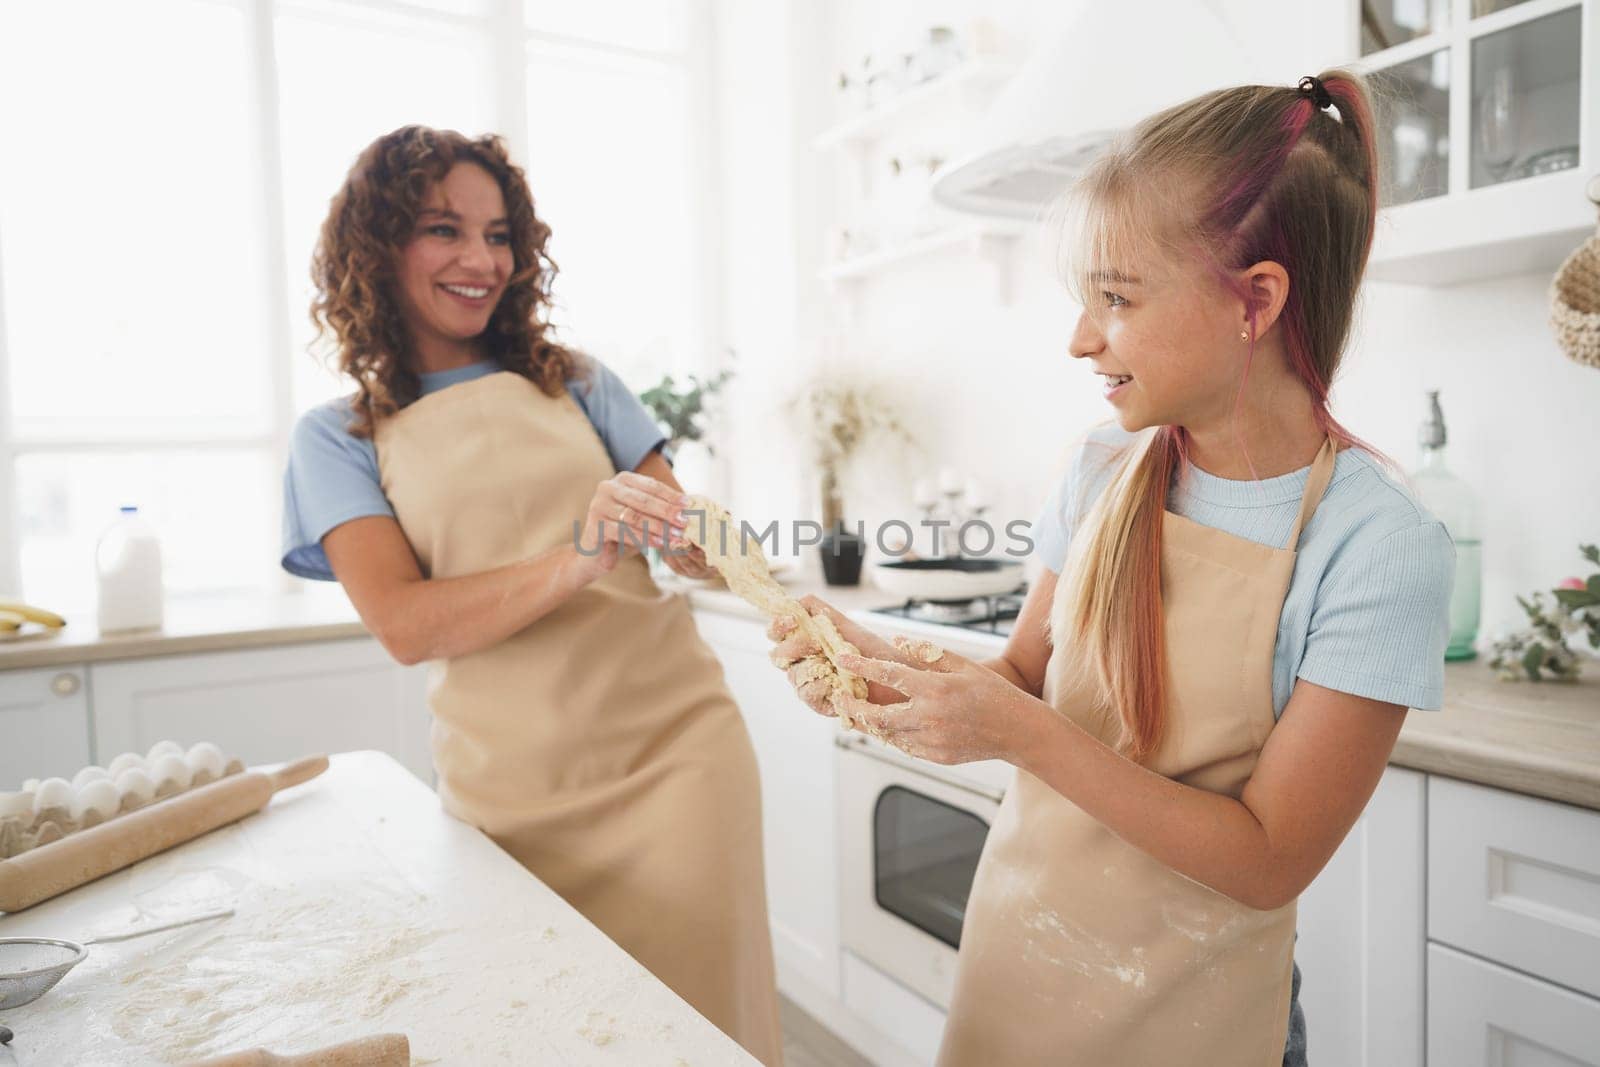 Teen girl helping her mom to cook dough in their kitchen at home by Fabrikasimf